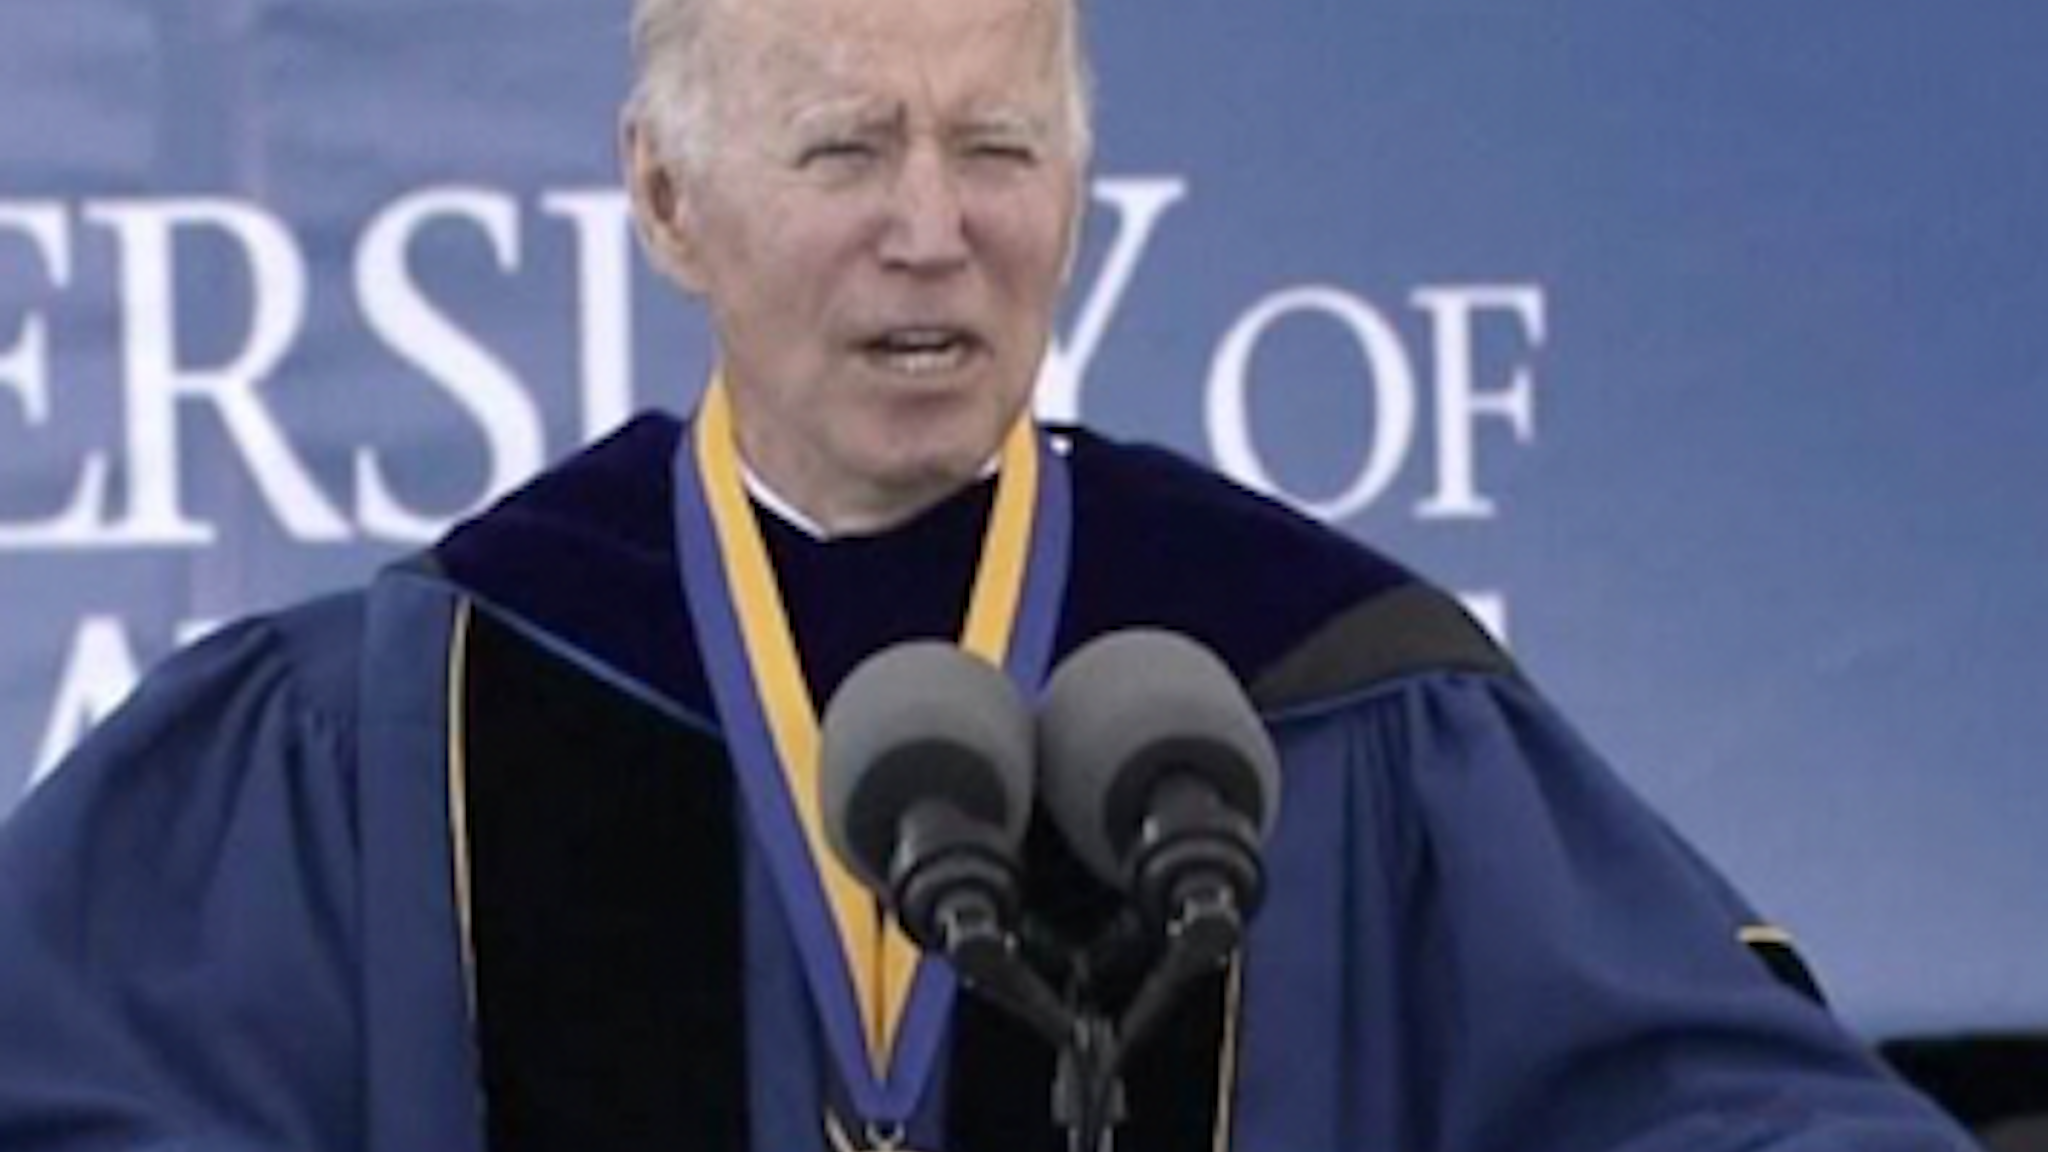 President Biden, speaking at University of Delaware Saturday, repeated the false claim that Jan. 6 rioters killed police officers